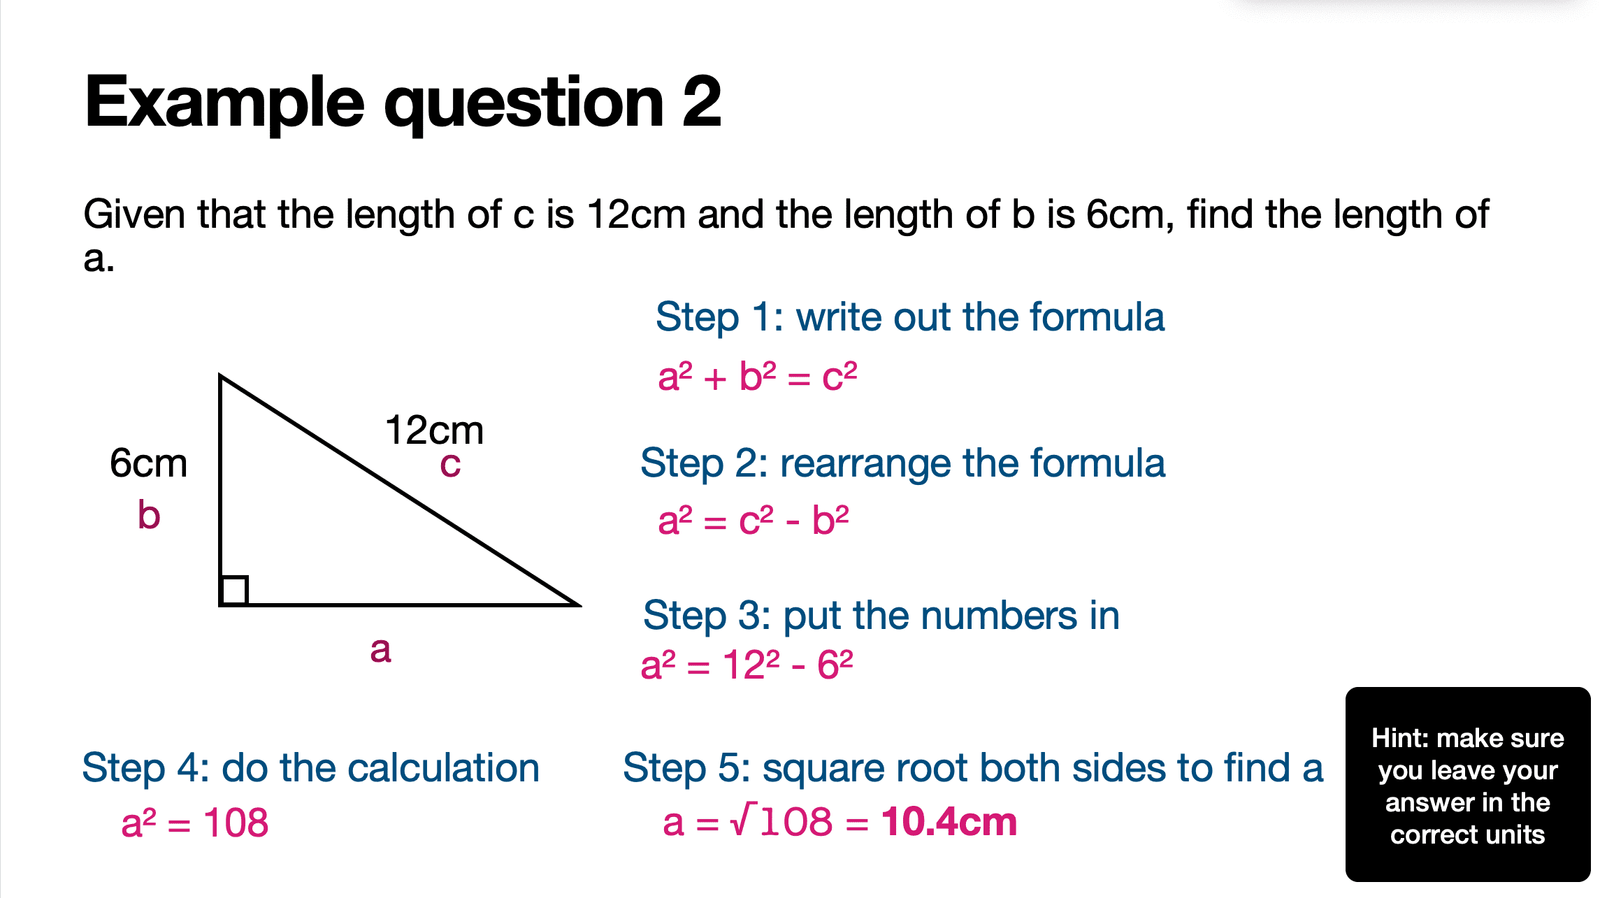 gcse-maths-pythagoras-bearings-parallel-lines-explanation-examples-practice-questions